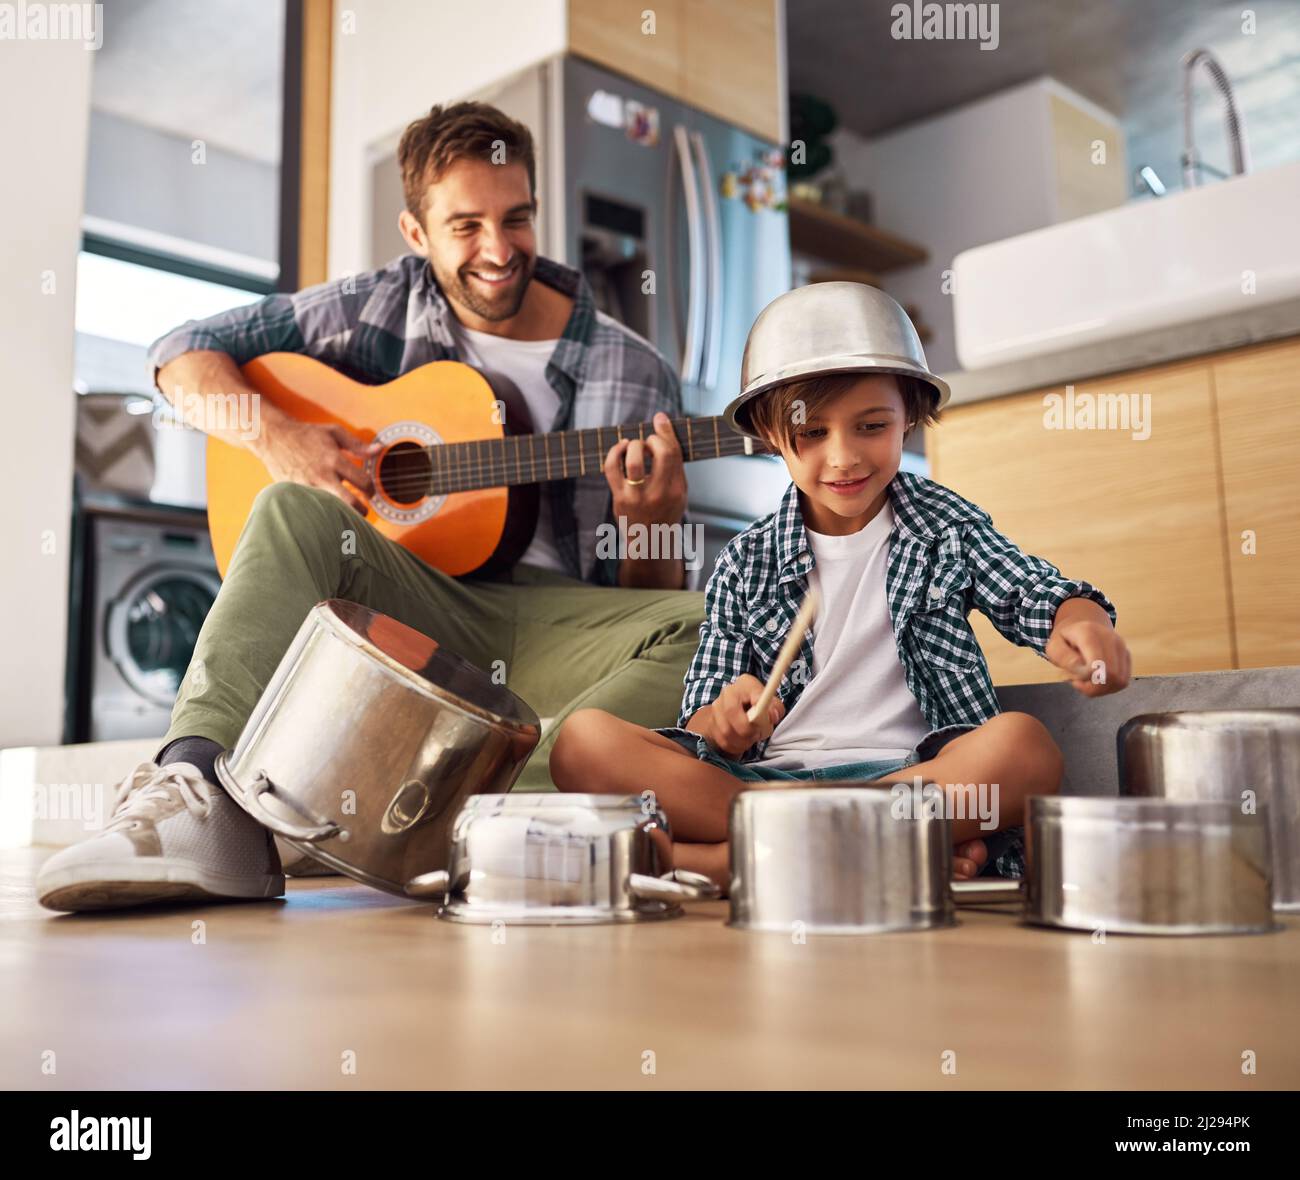 Its a father-son collaboration. Shot of a happy father accompanying his young son on the guitar while he drums on a set of cooking pots. Stock Photo